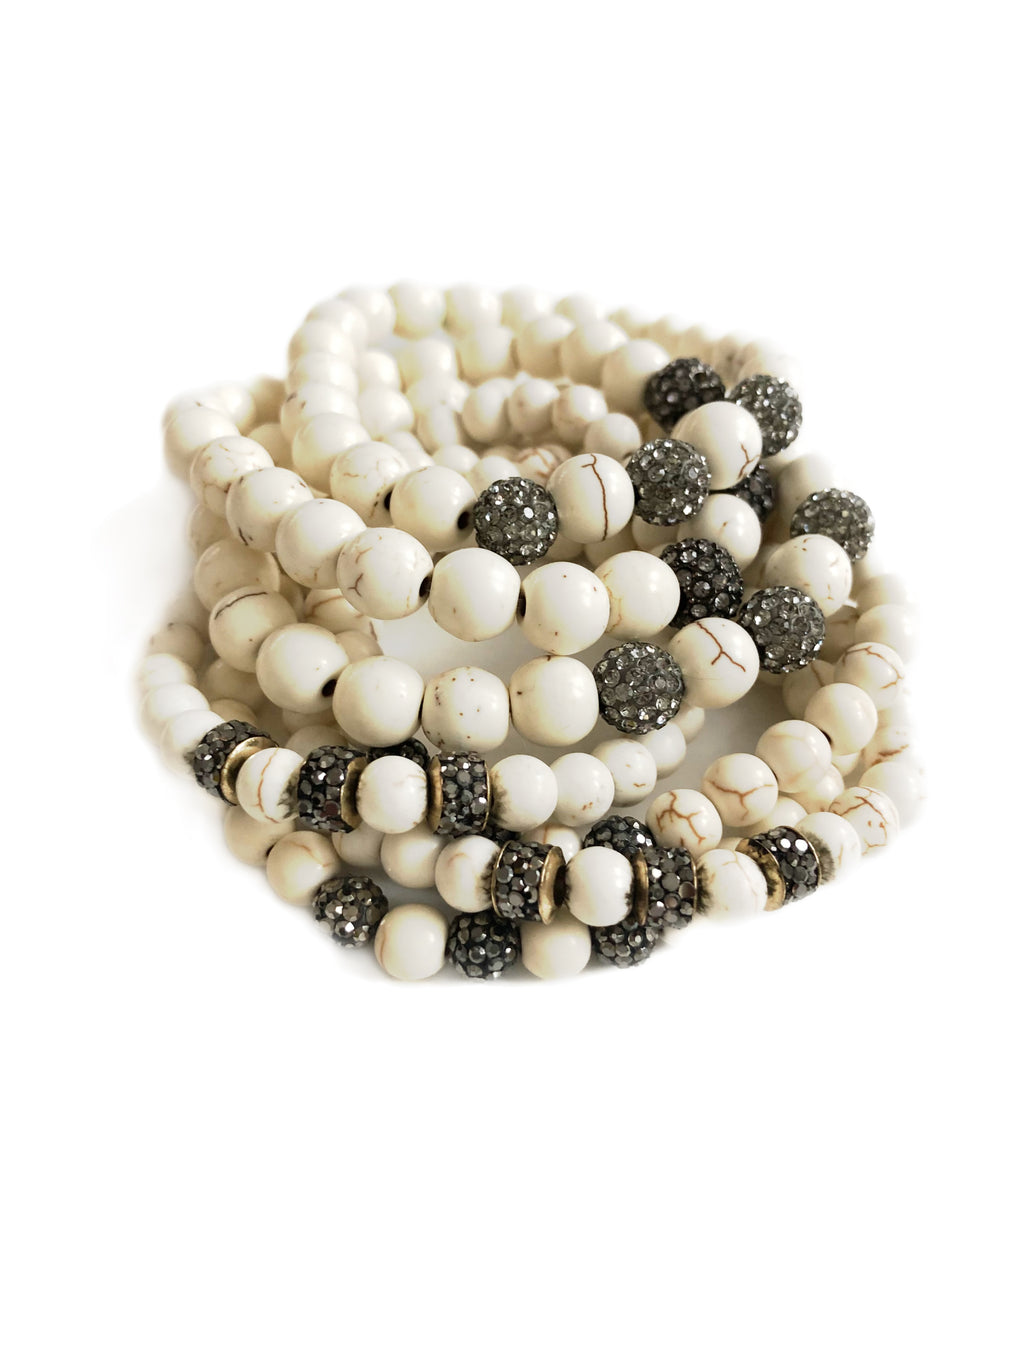 White Turquoise 6mm Beads & Pave Ball Bracelet